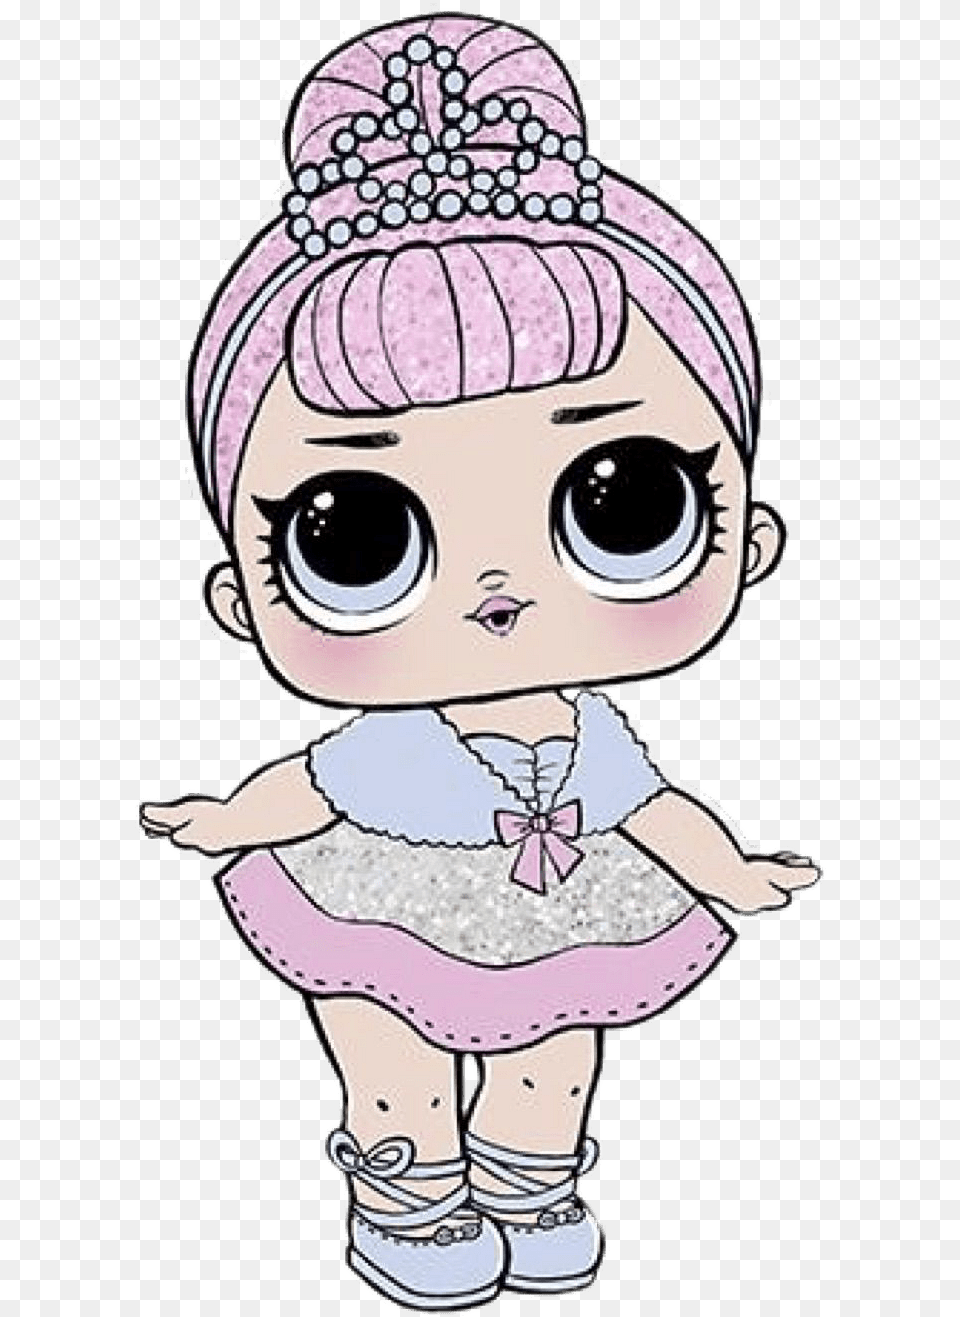 Crystal Queen Transparent Crystal Queen Lol Doll, Book, Publication, Comics, Baby Png